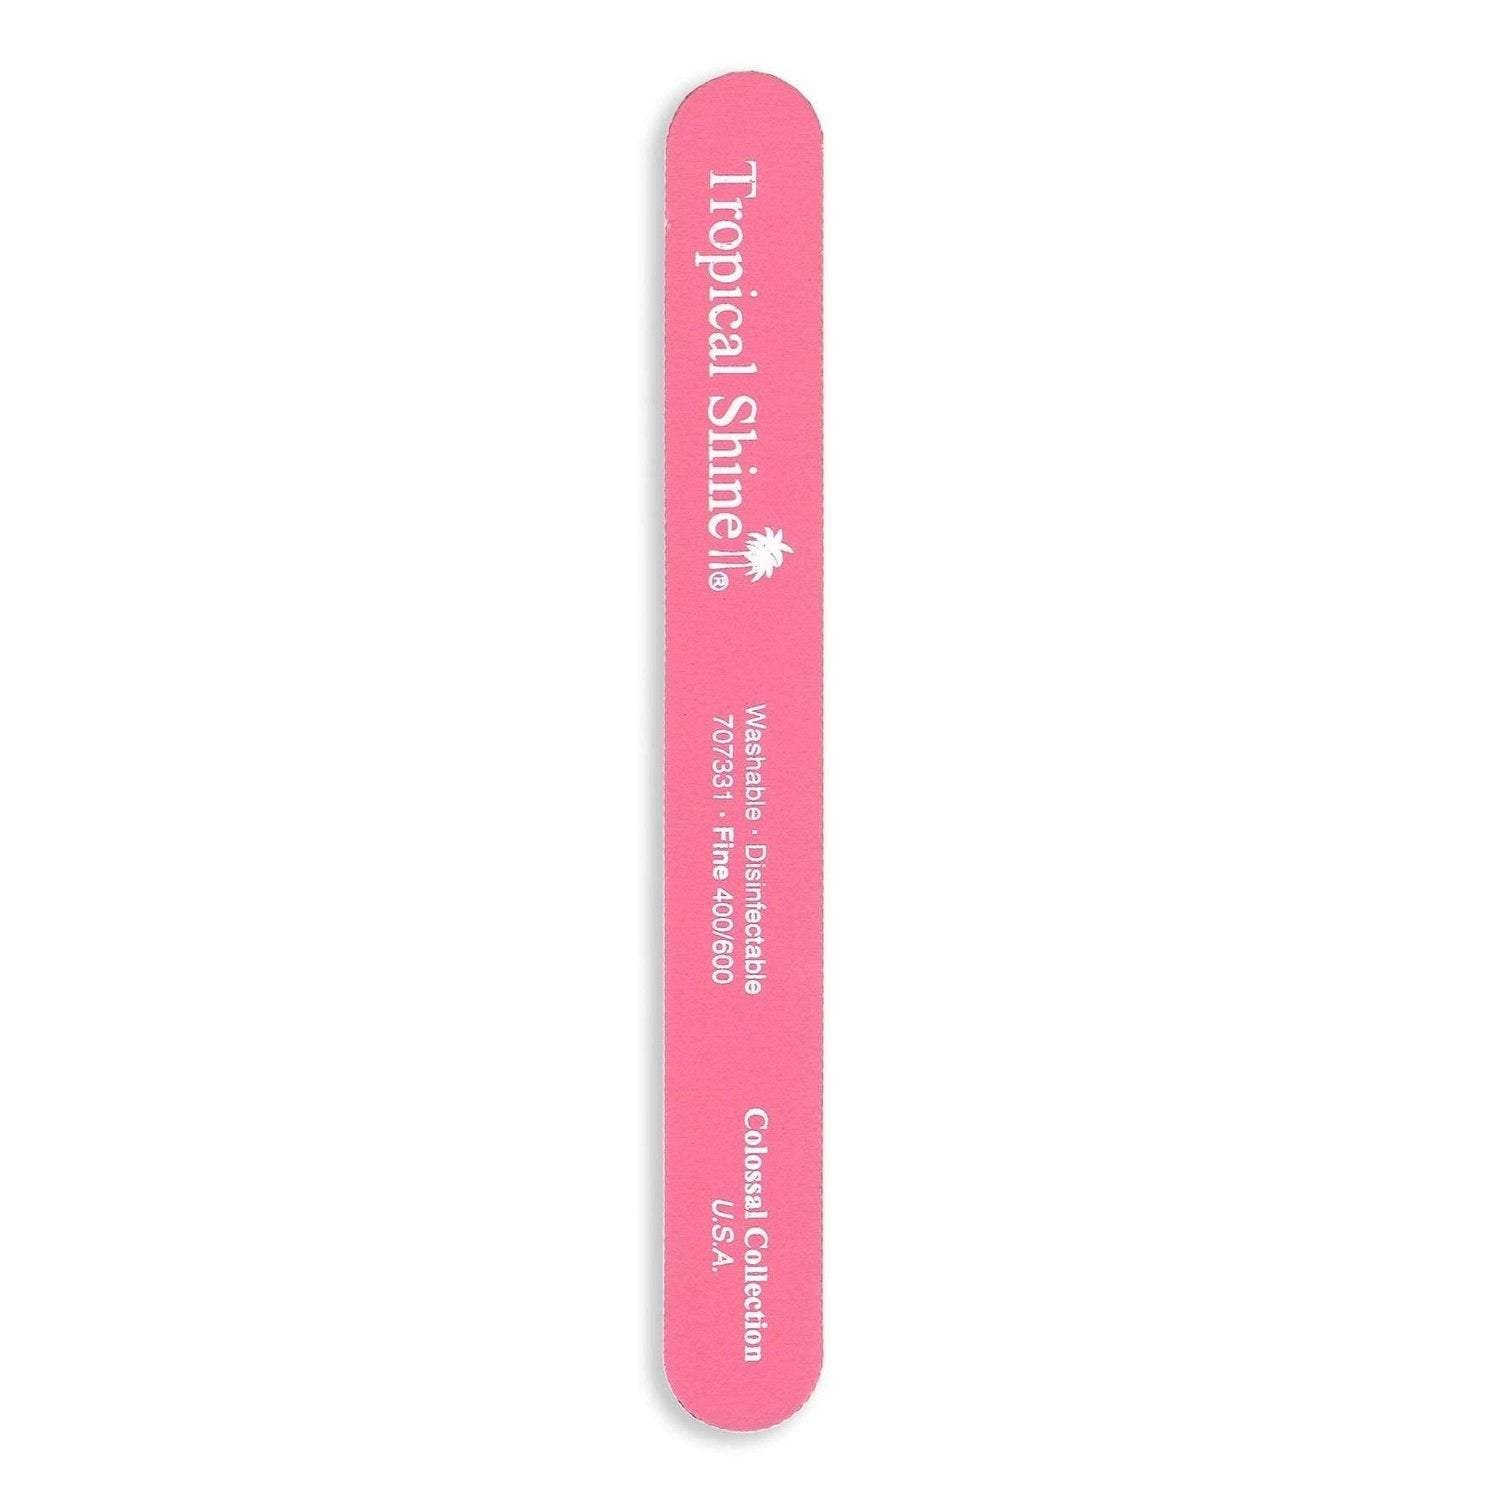 Tropical Shine Nail File Pink File 400/ 600 (Fine/ Extra Fine) 8 1/2 in x 1 in Large Size (707331)-Tropical Shine-Brand_Tropical Shine,Collection_Nails,Nail_Tools,Tool_Nails